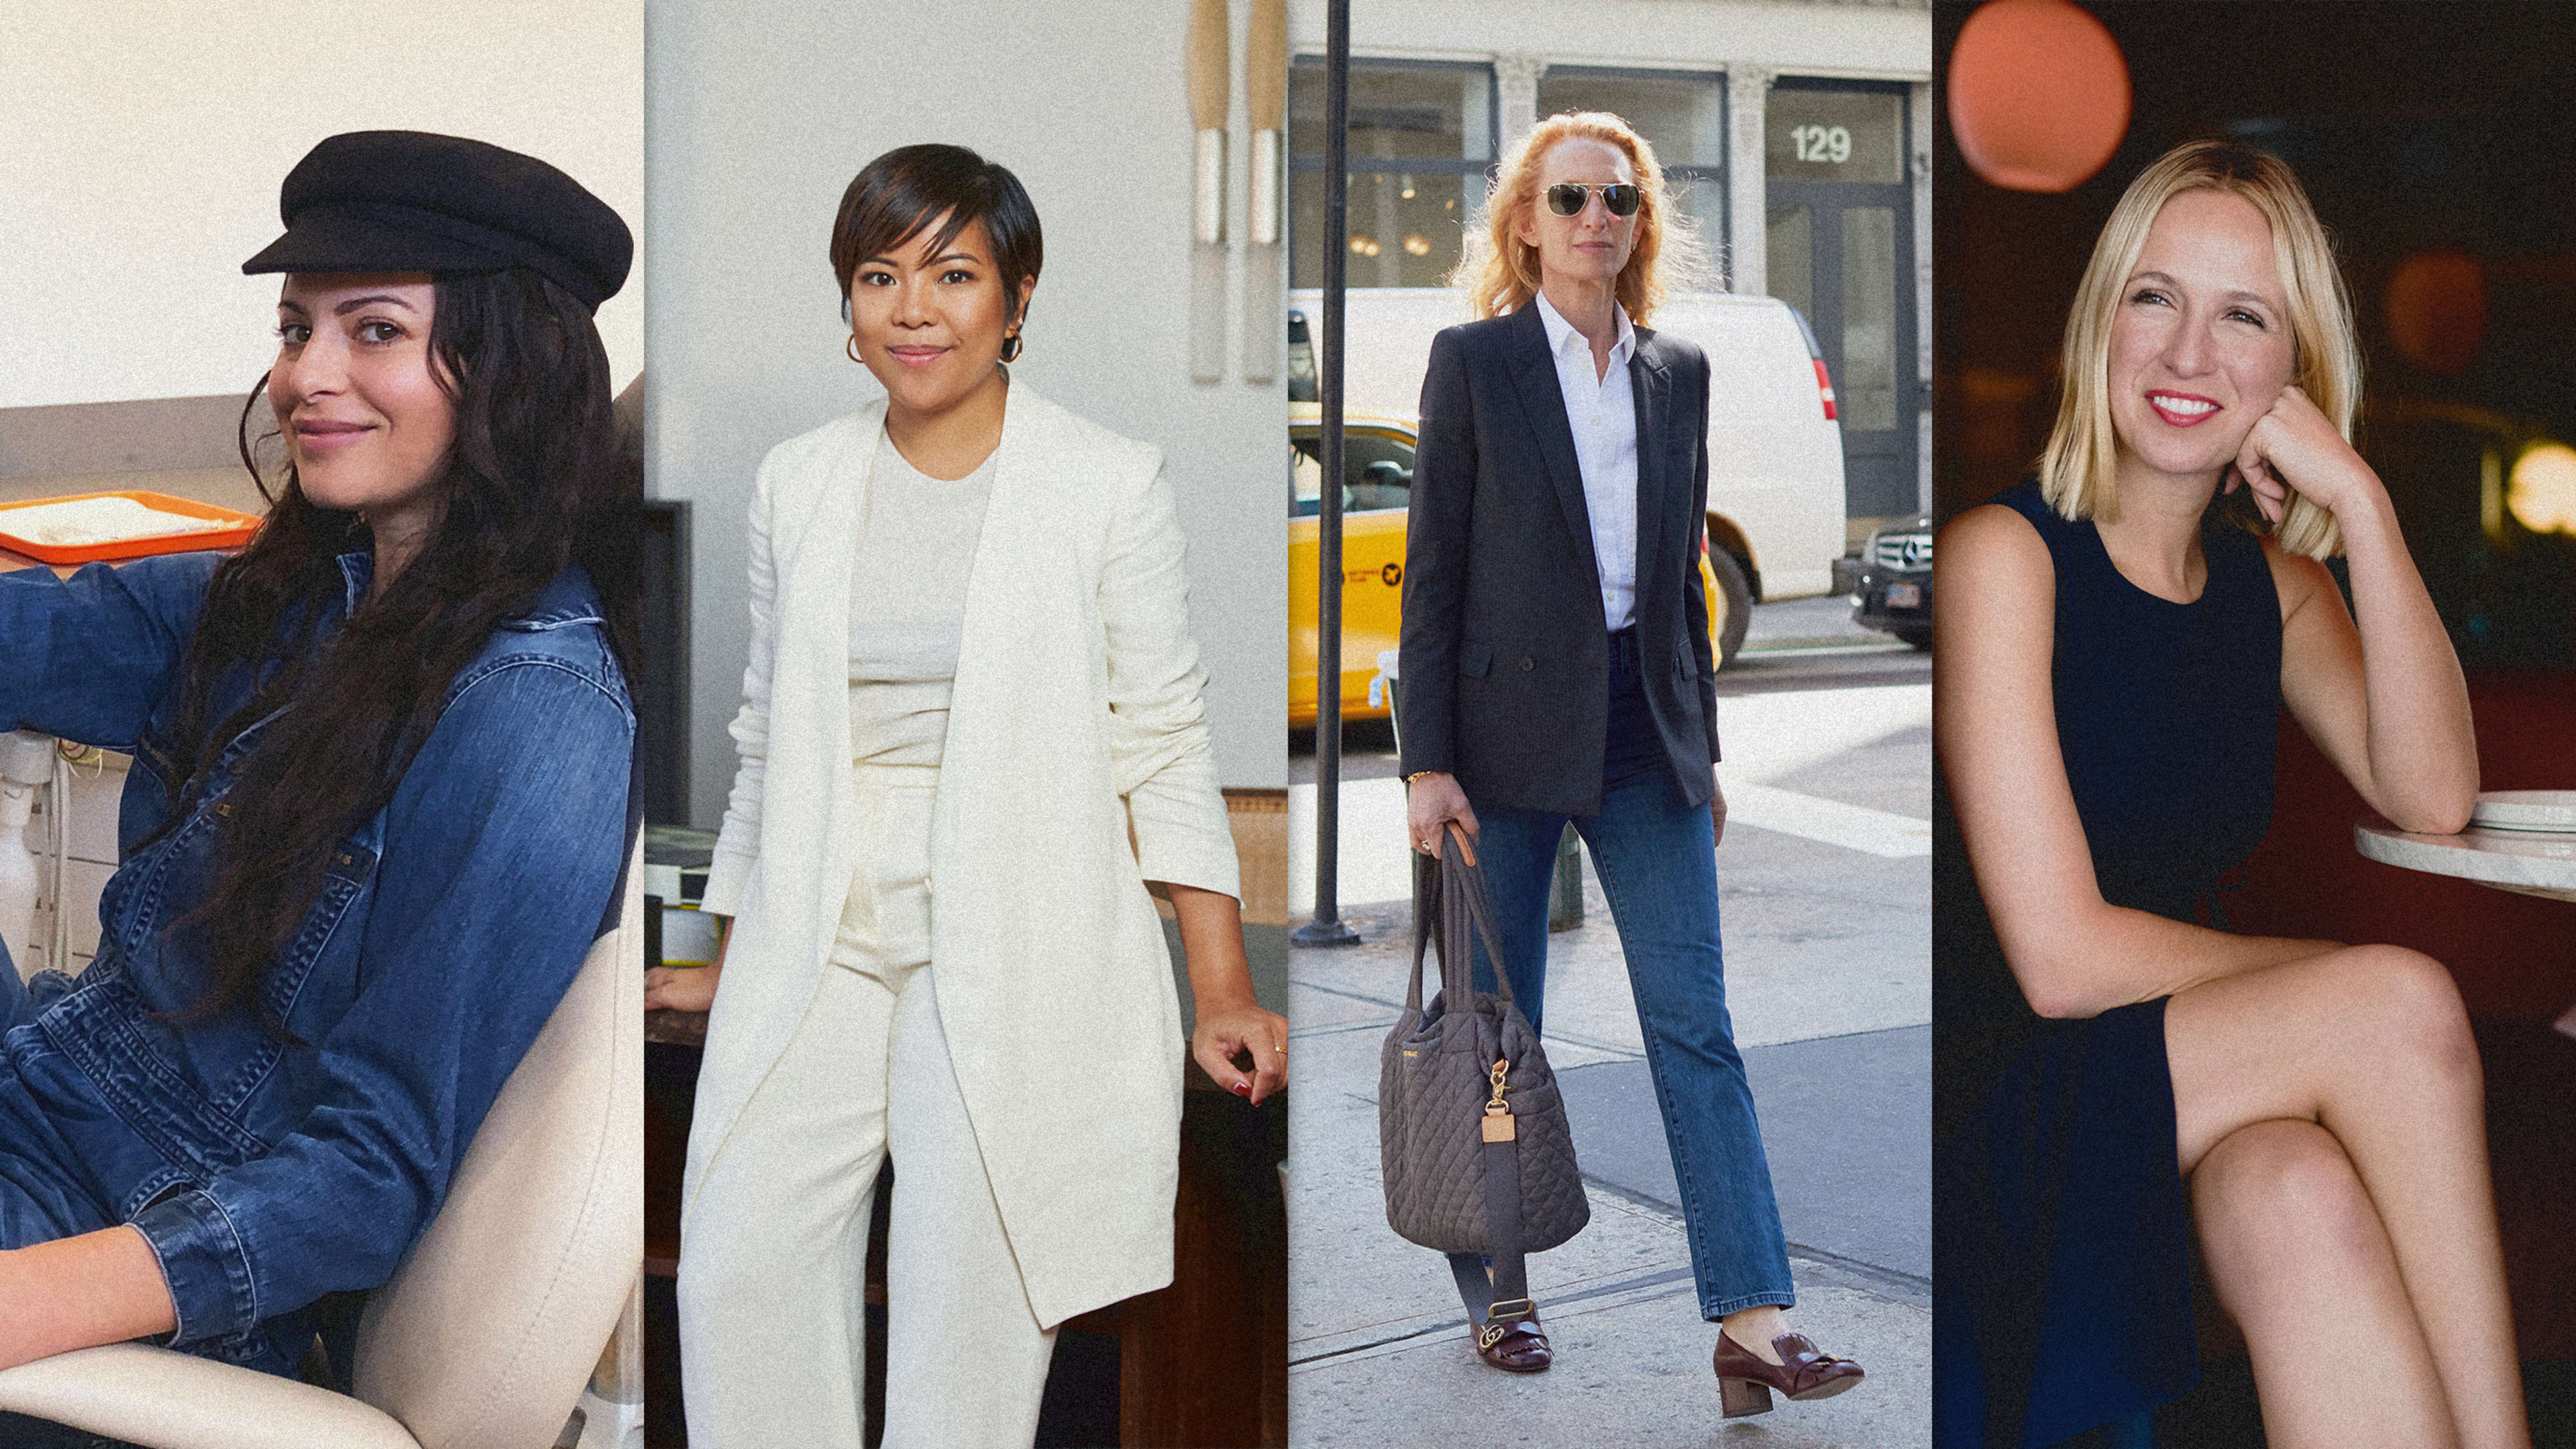 These 4 designers wear the same thing every day. Here’s how to copy their look